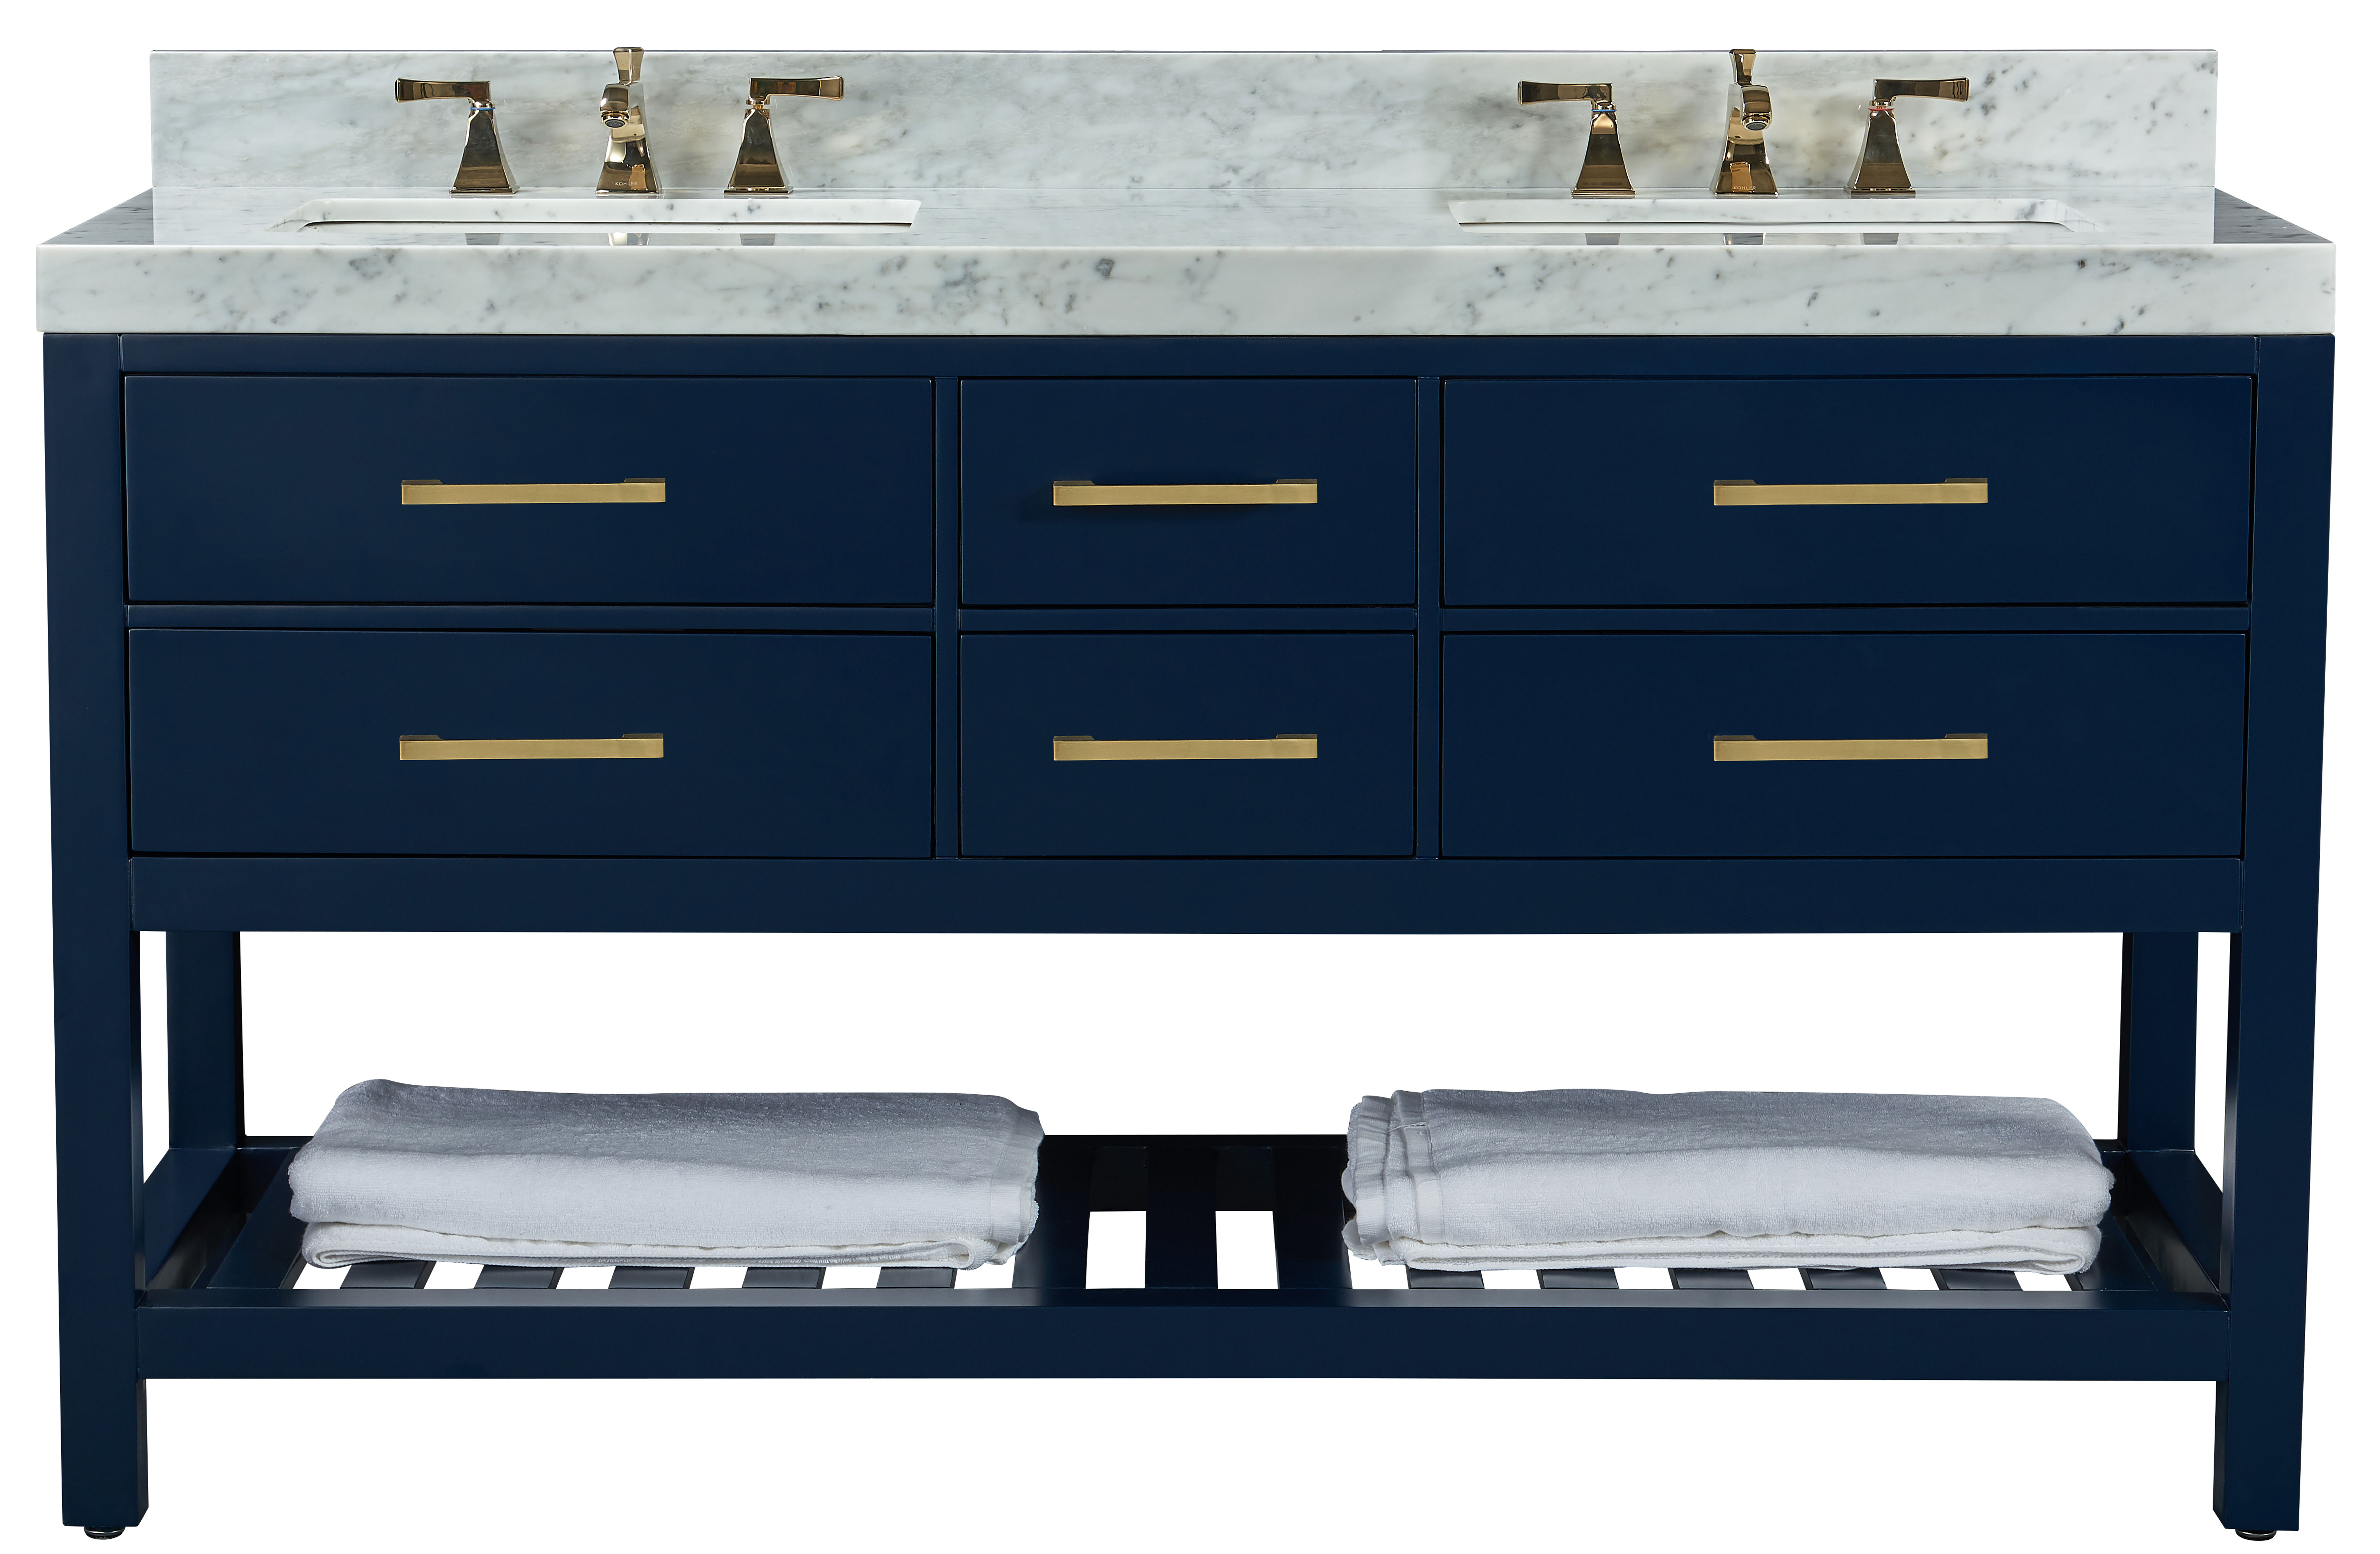 60" Double Sink Bath Vanity Set in Heritage Blue with Italian Carrara White Marble Vanity top and White Undermount Basin